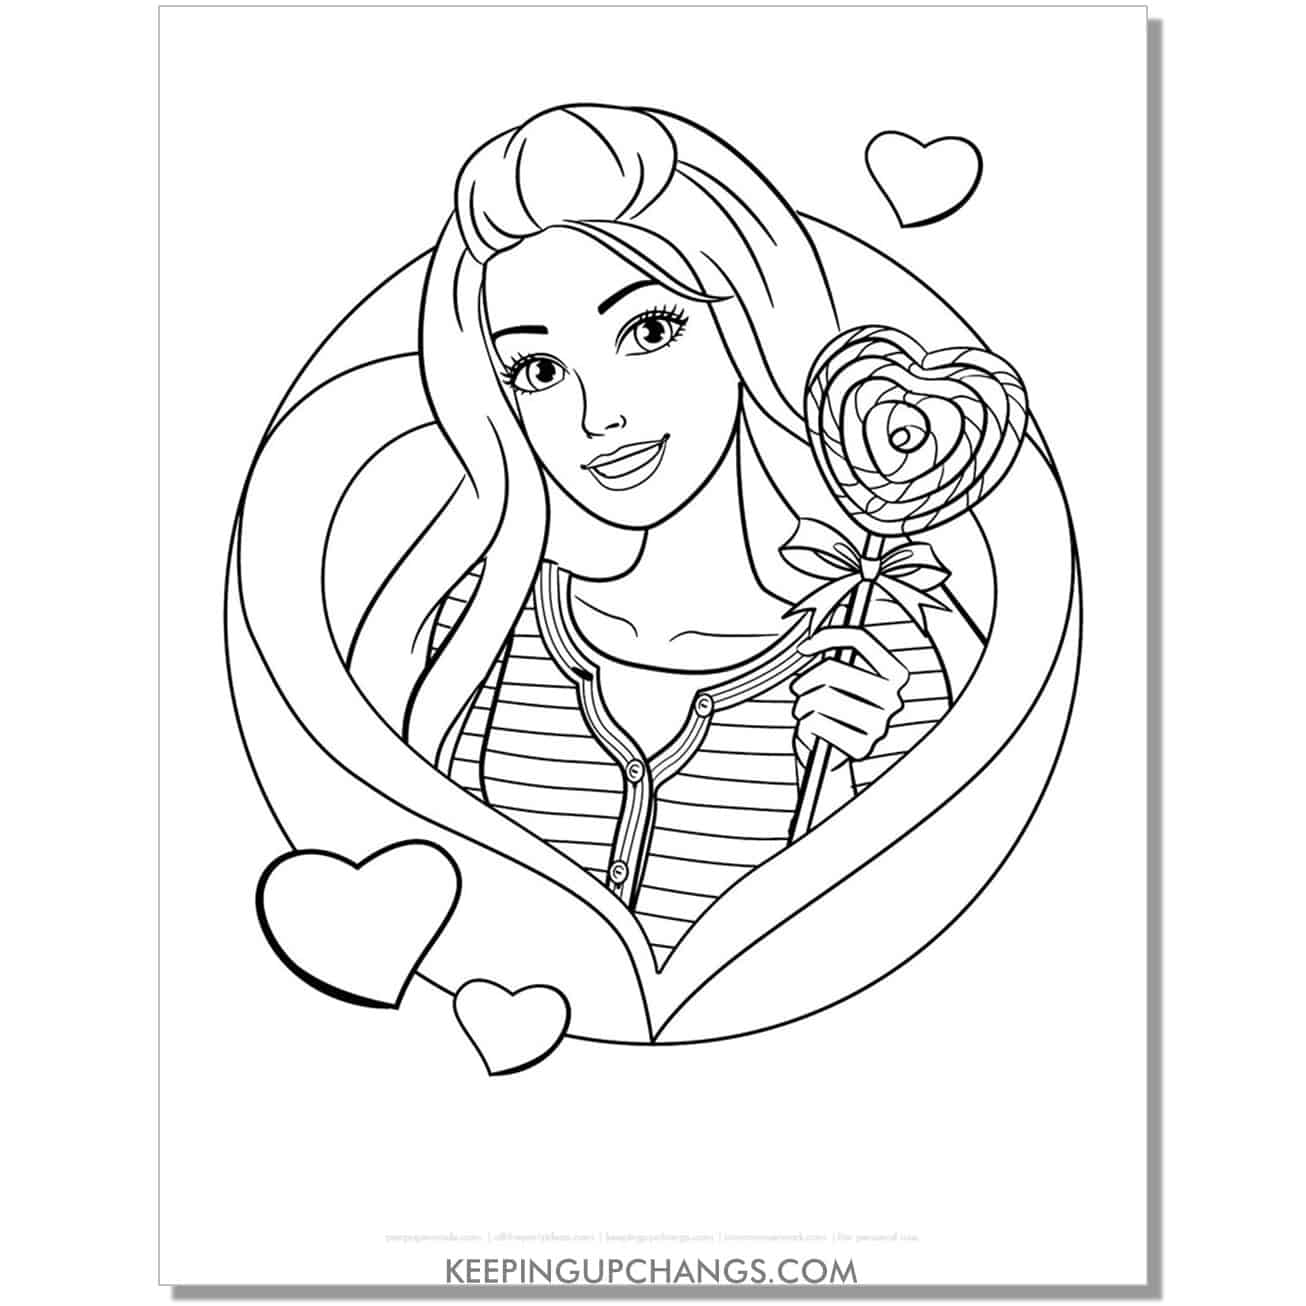 Valentine's barbie with heart lollipop in rose coloring page.